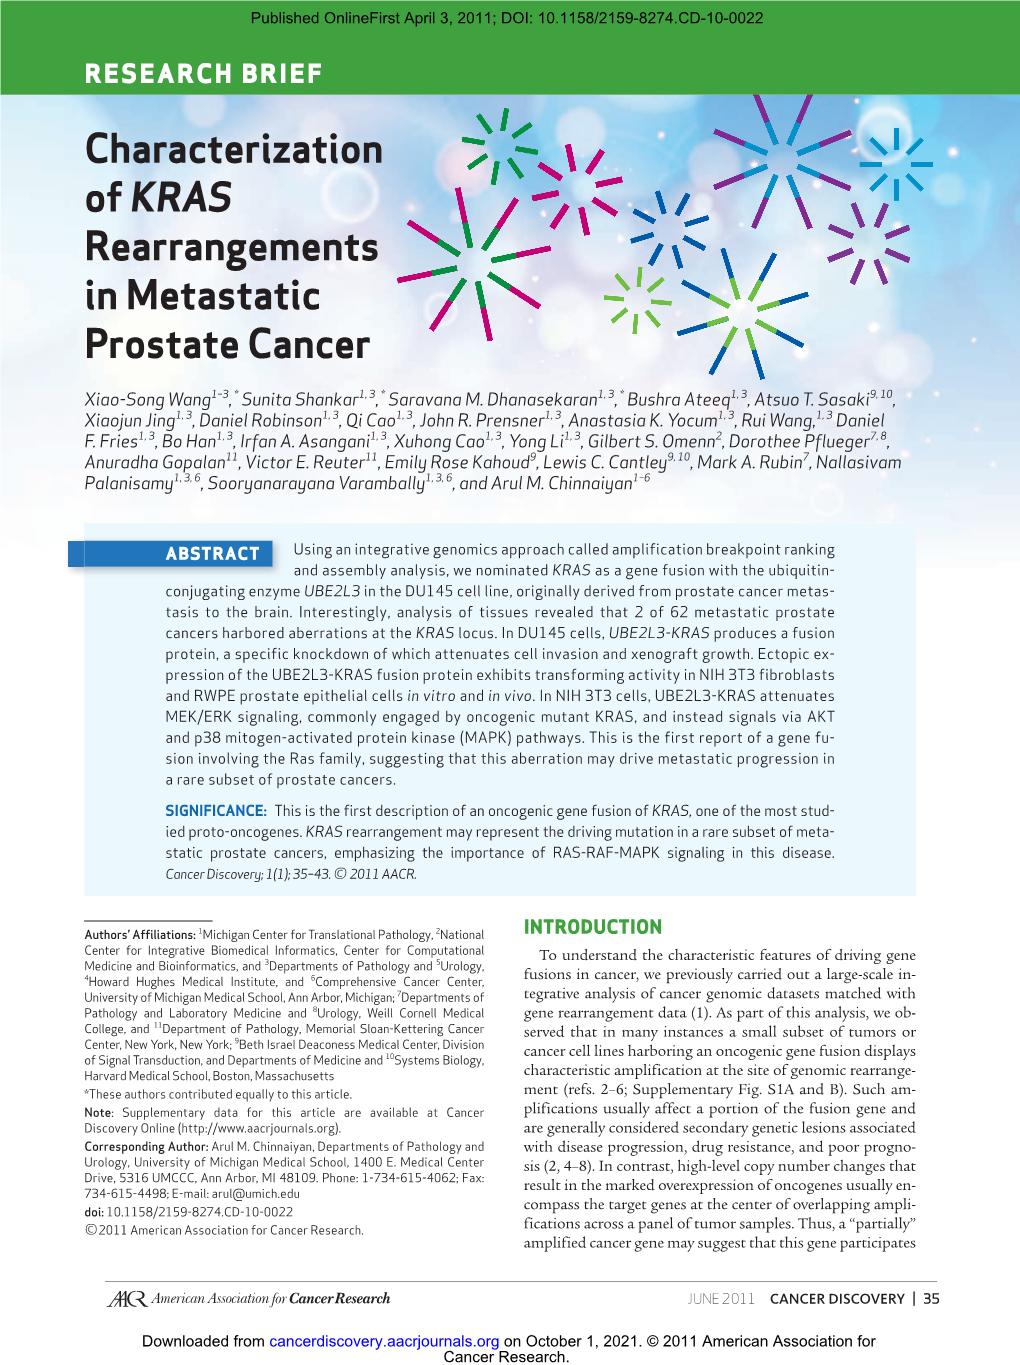 Characterization of KRAS Rearrangements in Metastatic Prostate Cancer